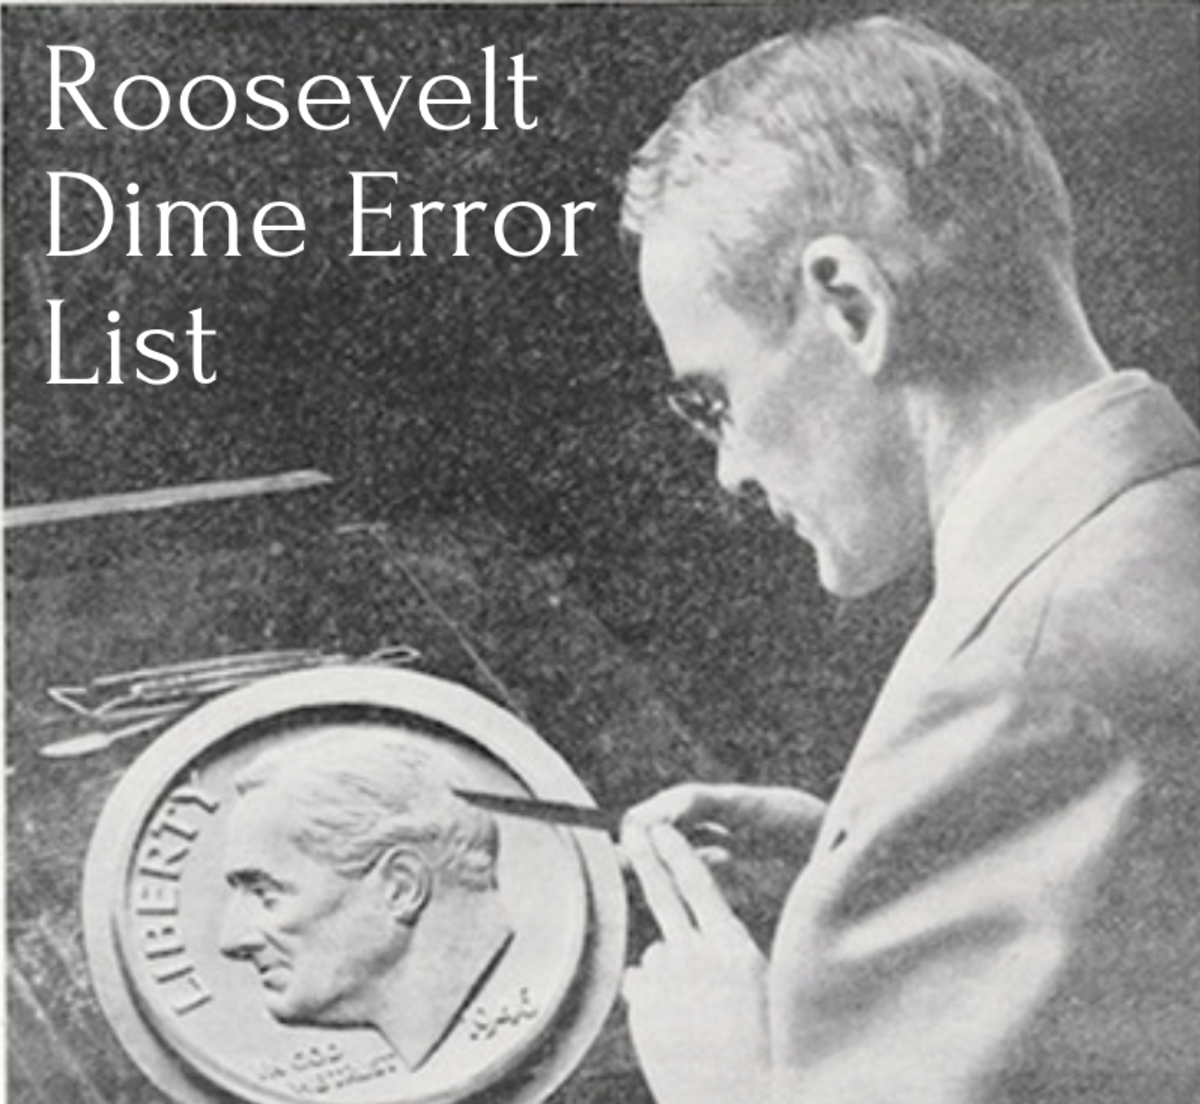 ROOSEVELT DIMES CLAD 2015-S /& 2016-S PROOF 2013-S 2014-S LOT OF 4 COINS